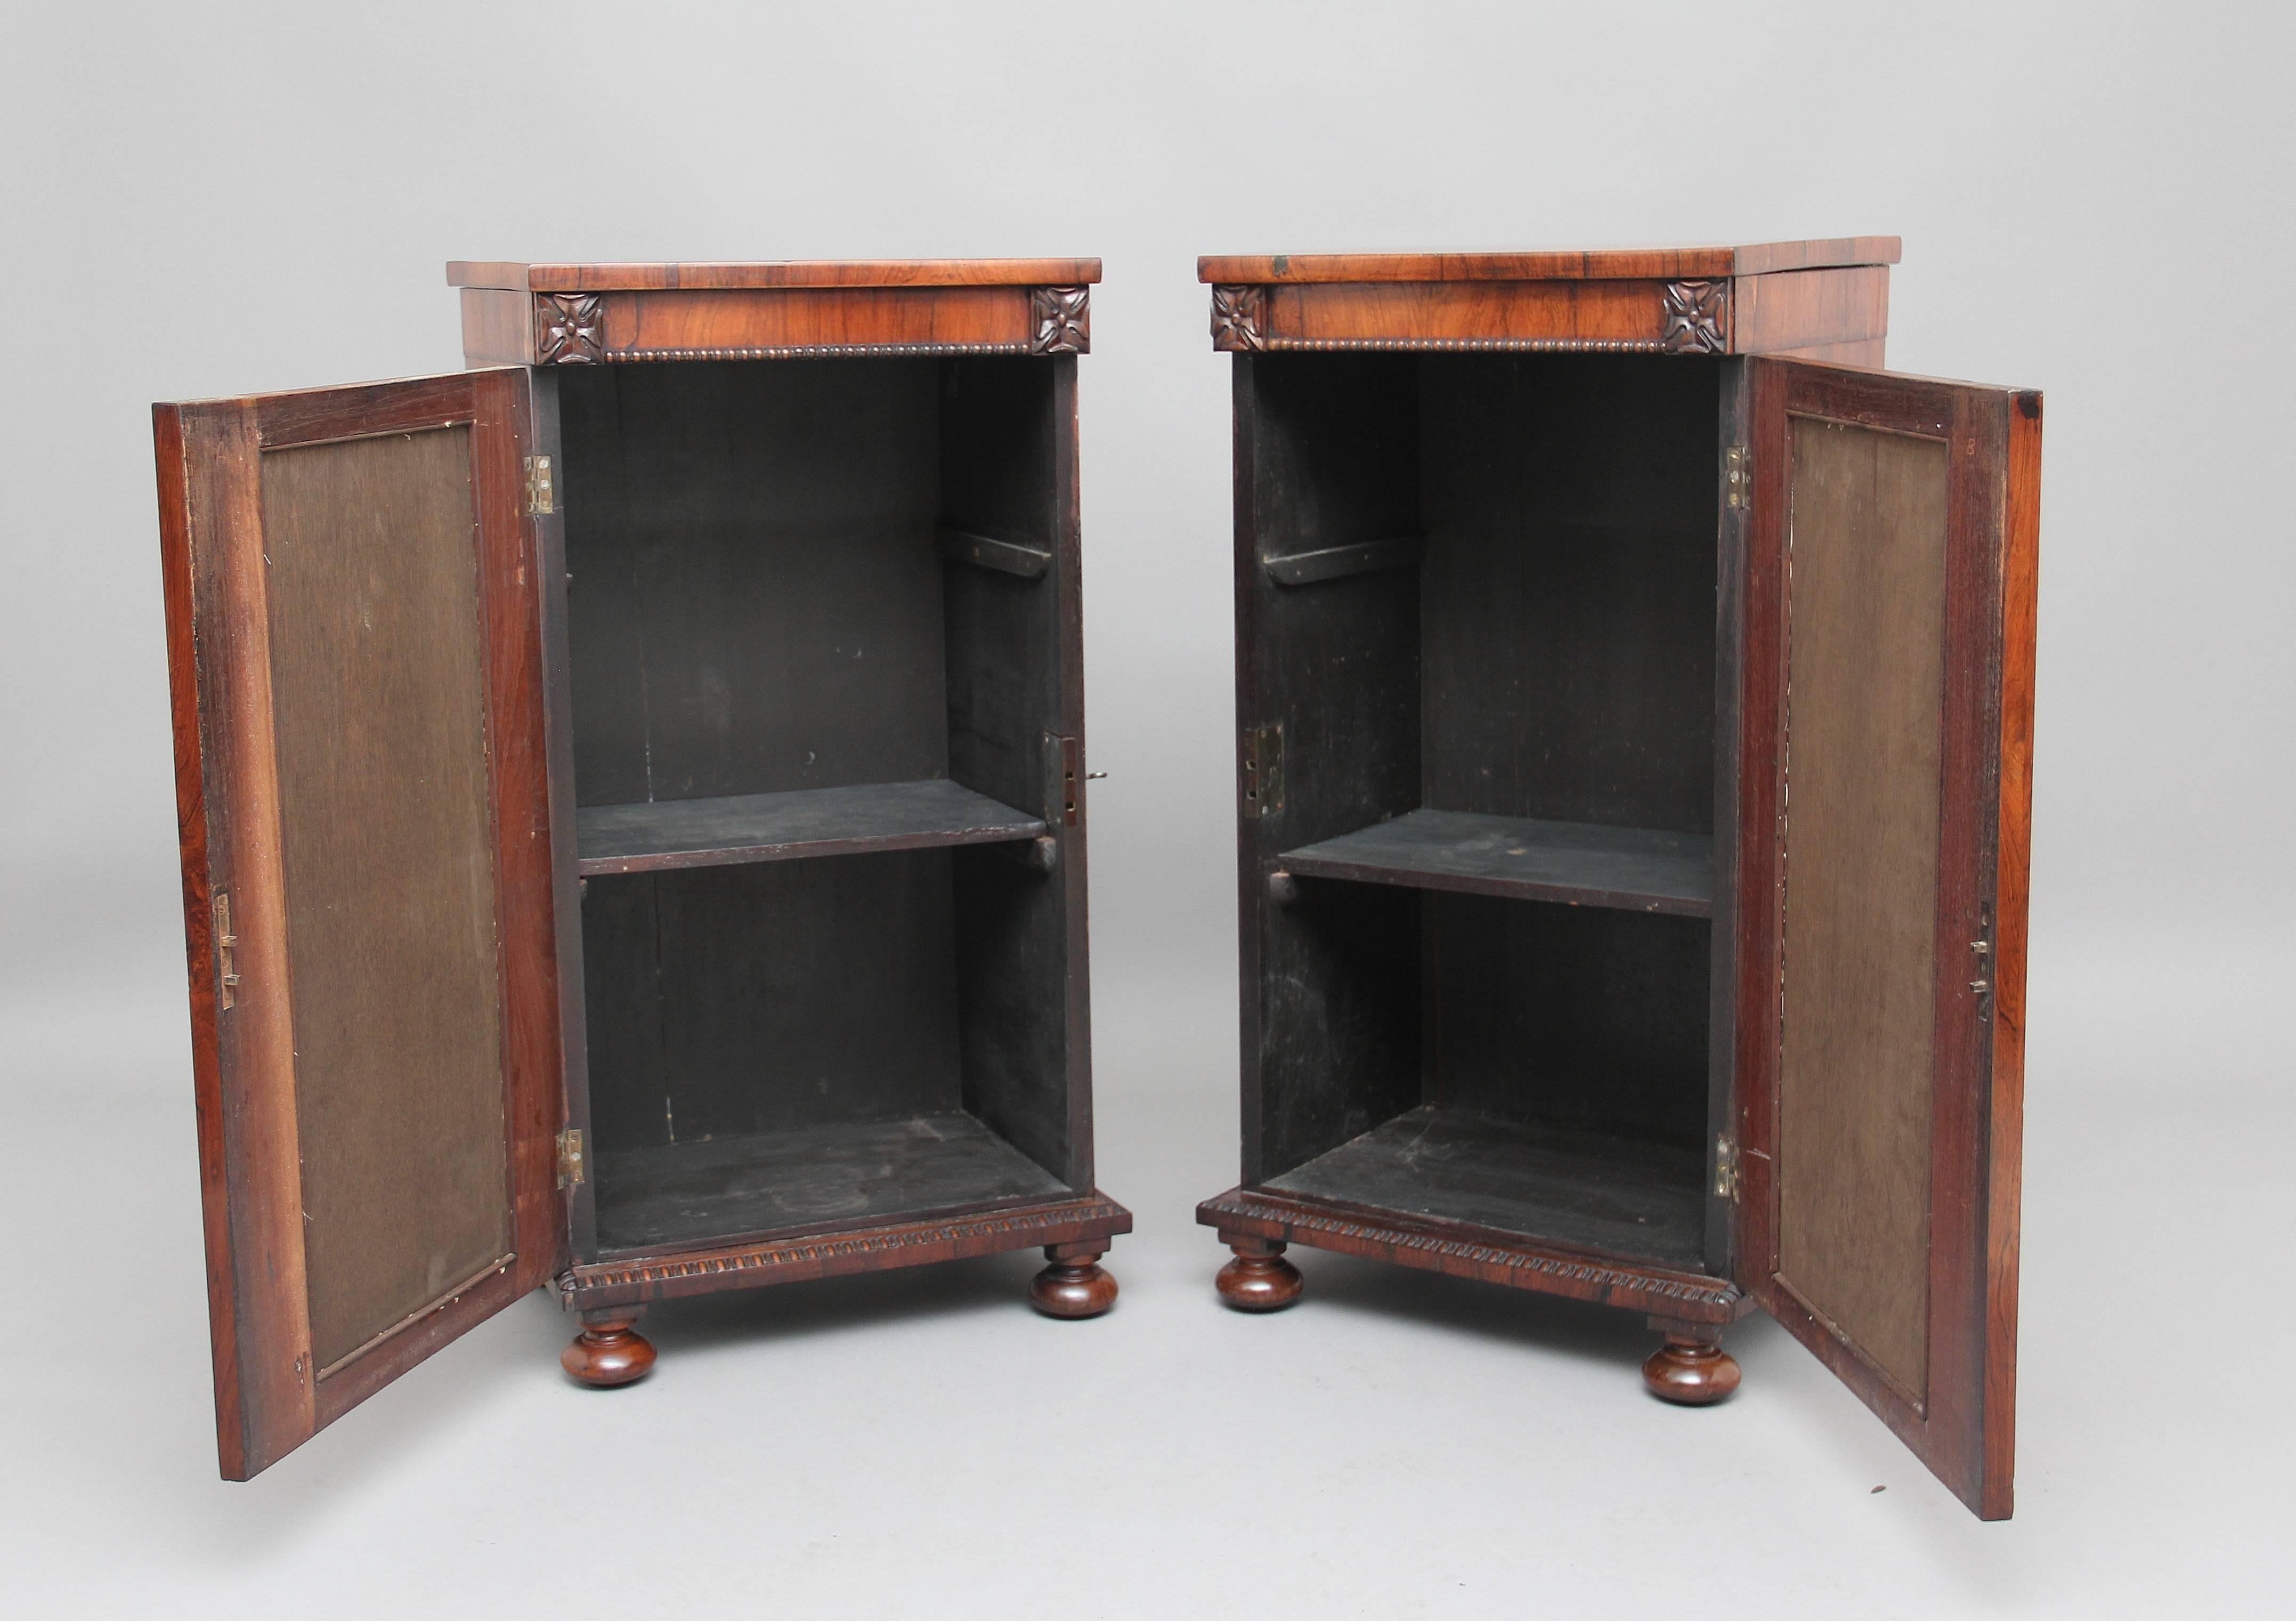 A lovely pair of 19th century rosewood pedestal cabinets, nice figured rosewood tops, the front of the cabinets having carved patraes either side at the top, columns either side with beading running along in each column, the hinged door having a